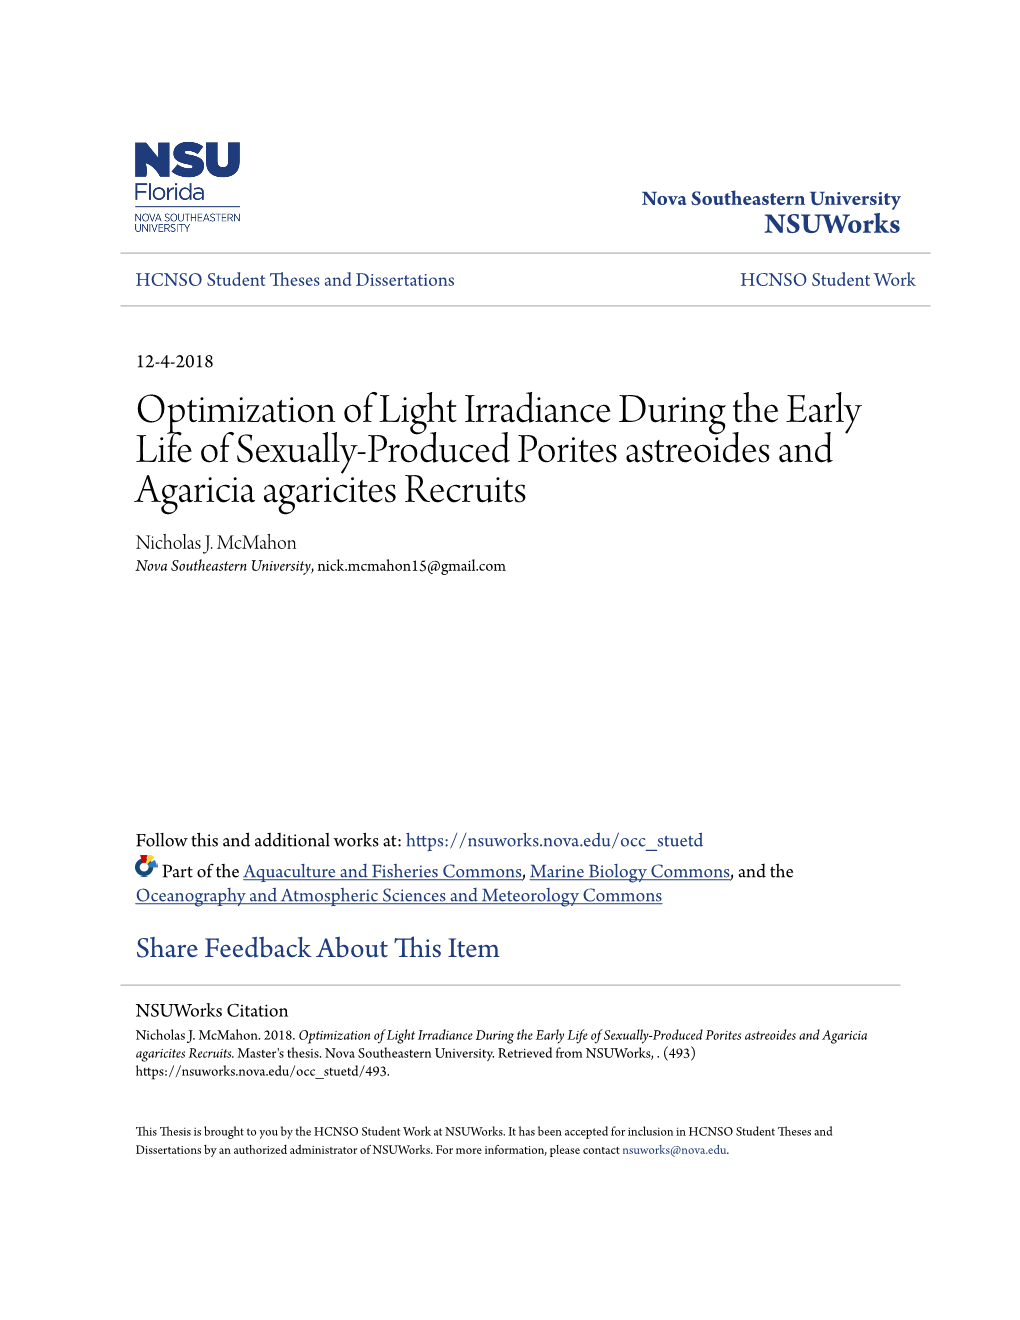 Optimization of Light Irradiance During the Early Life of Sexually-Produced Porites Astreoides and Agaricia Agaricites Recruits Nicholas J